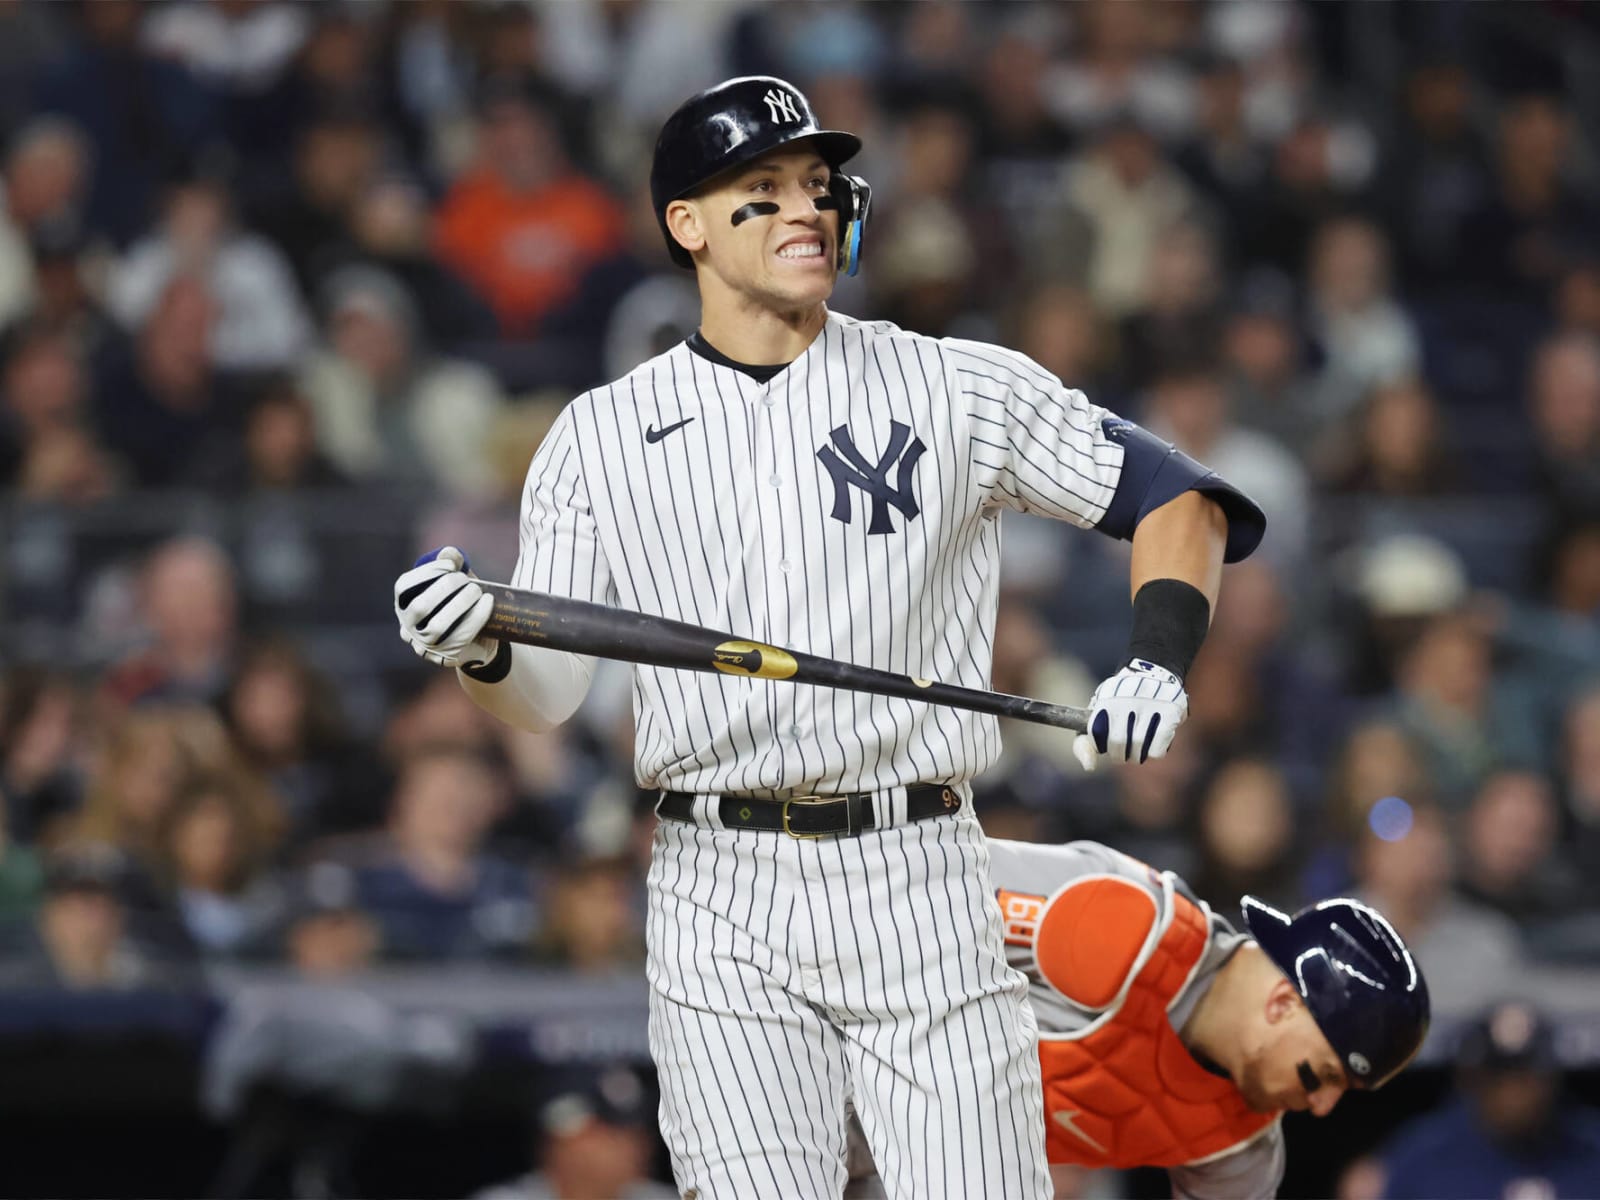 Giants get smashed by former Giants legend Aaron Judge, disappoint